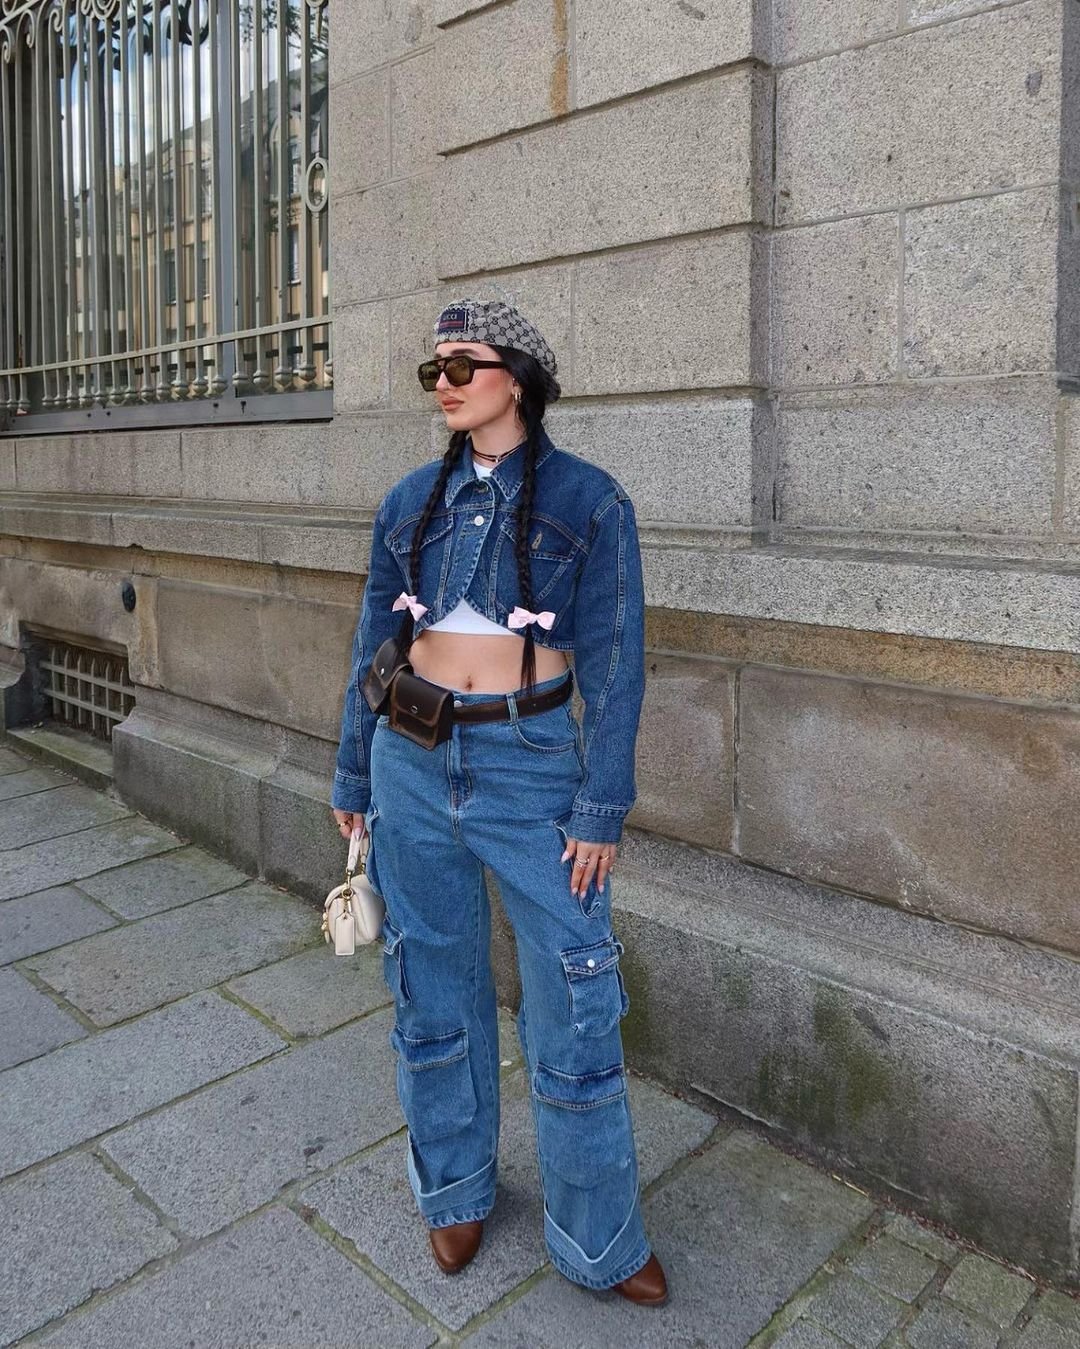 It girl - tendência dos anos 2000, all jeans, look jeans - tendência dos anos 2000 - Inverno - Street Style - https://stealthelook.com.br